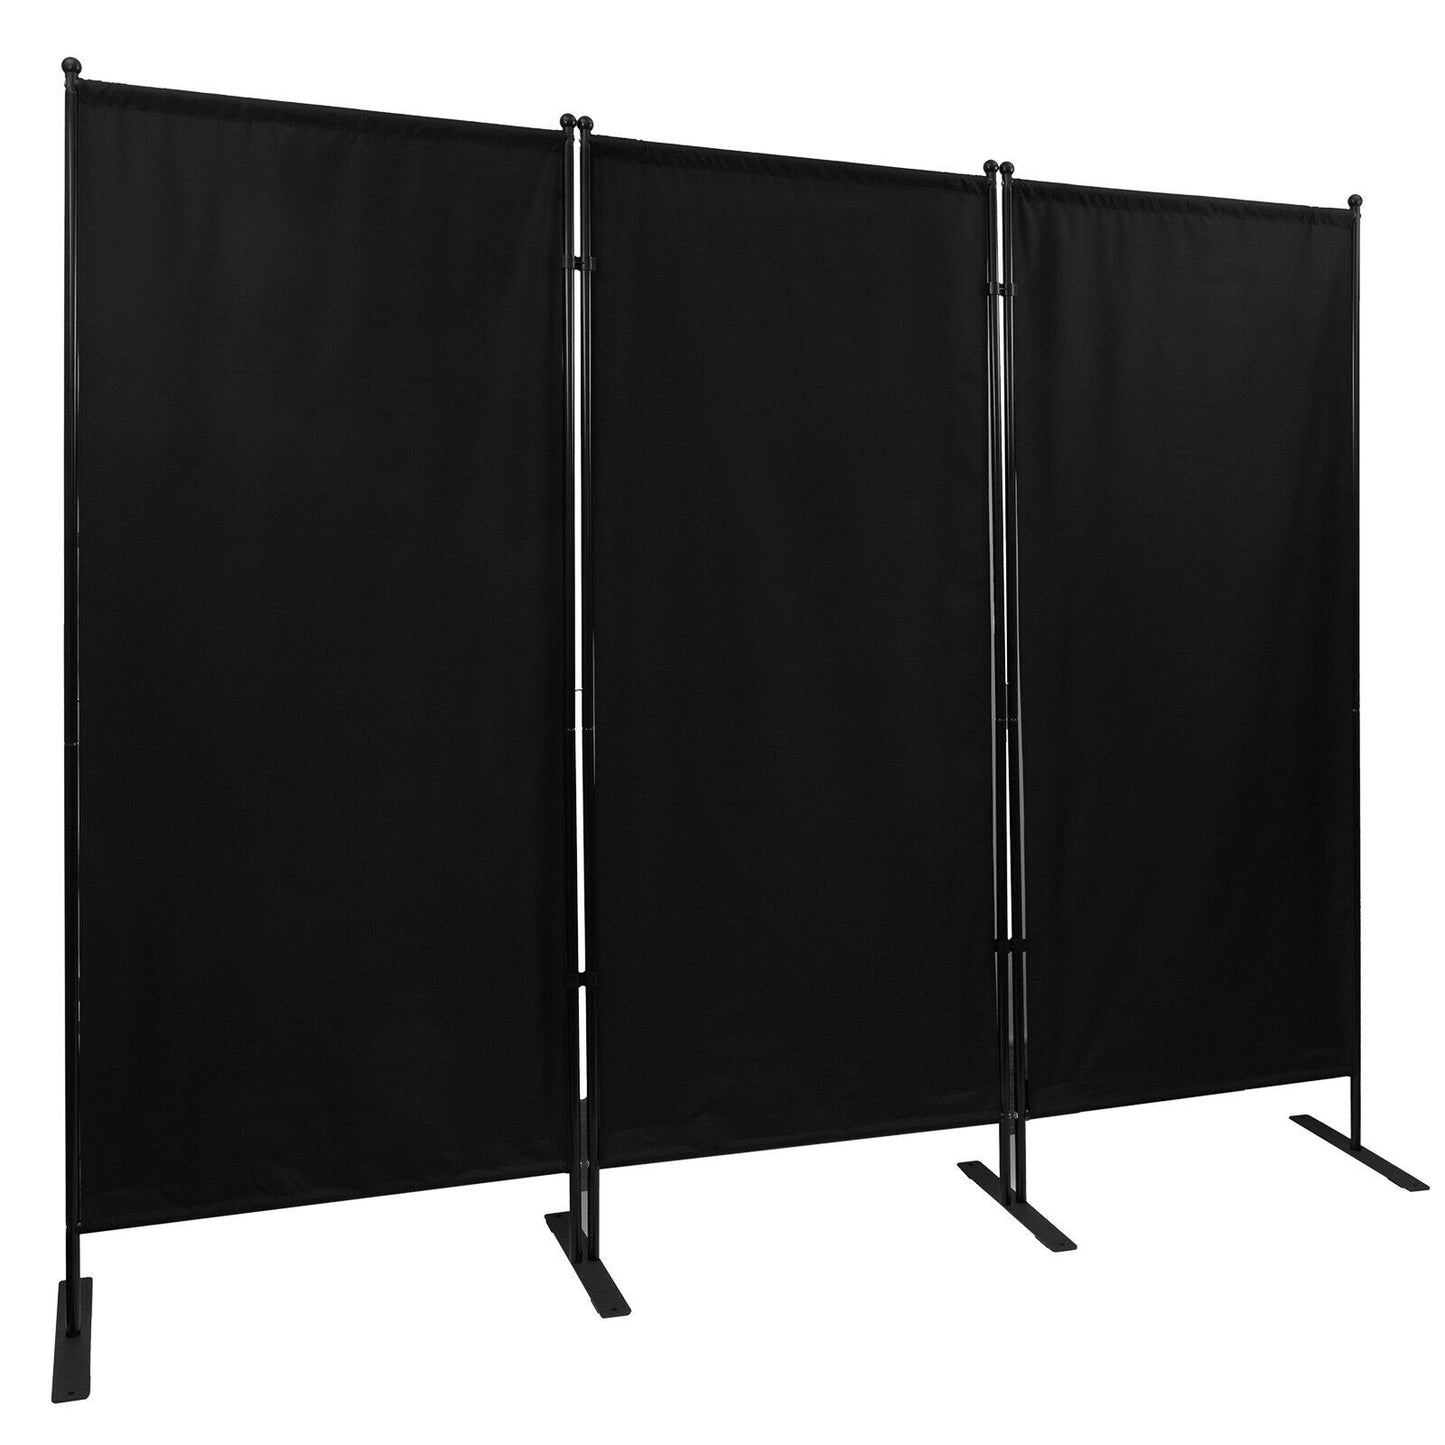 3-Panel Folding Room Divider Wall 88"x71" Office Partition Privacy Screen + Bag